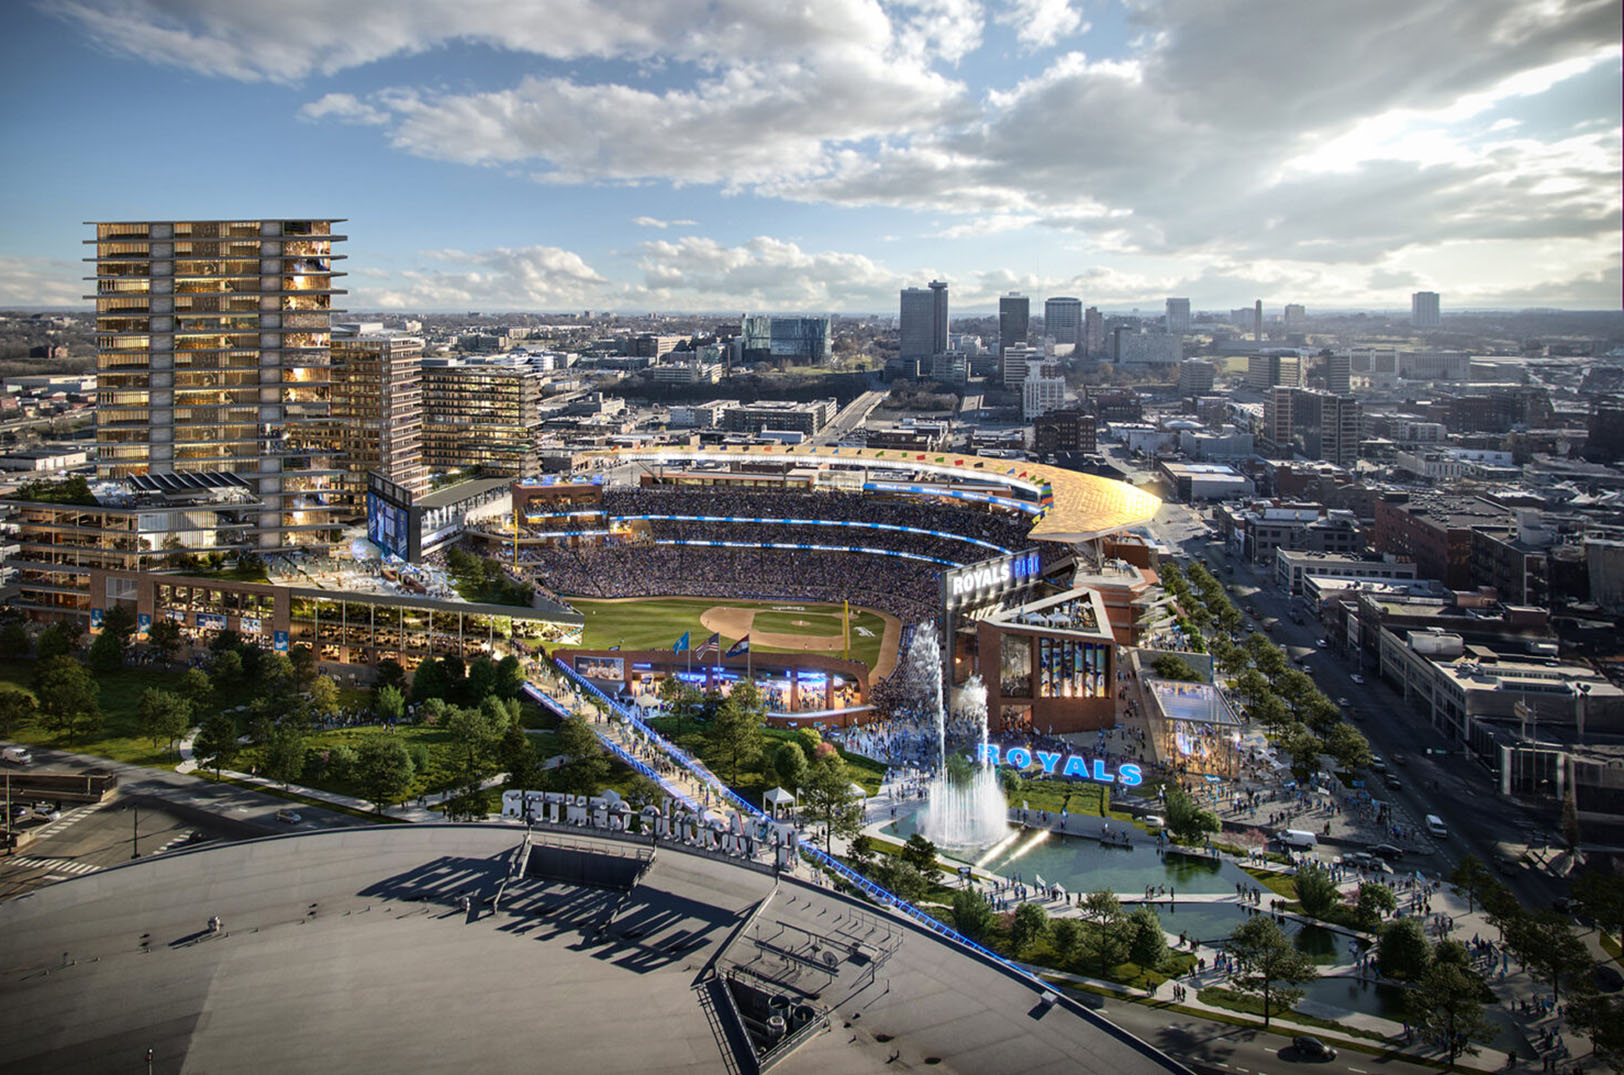 Royals ballpark plan gains support among longtime Crossroads advocates, though questions linger